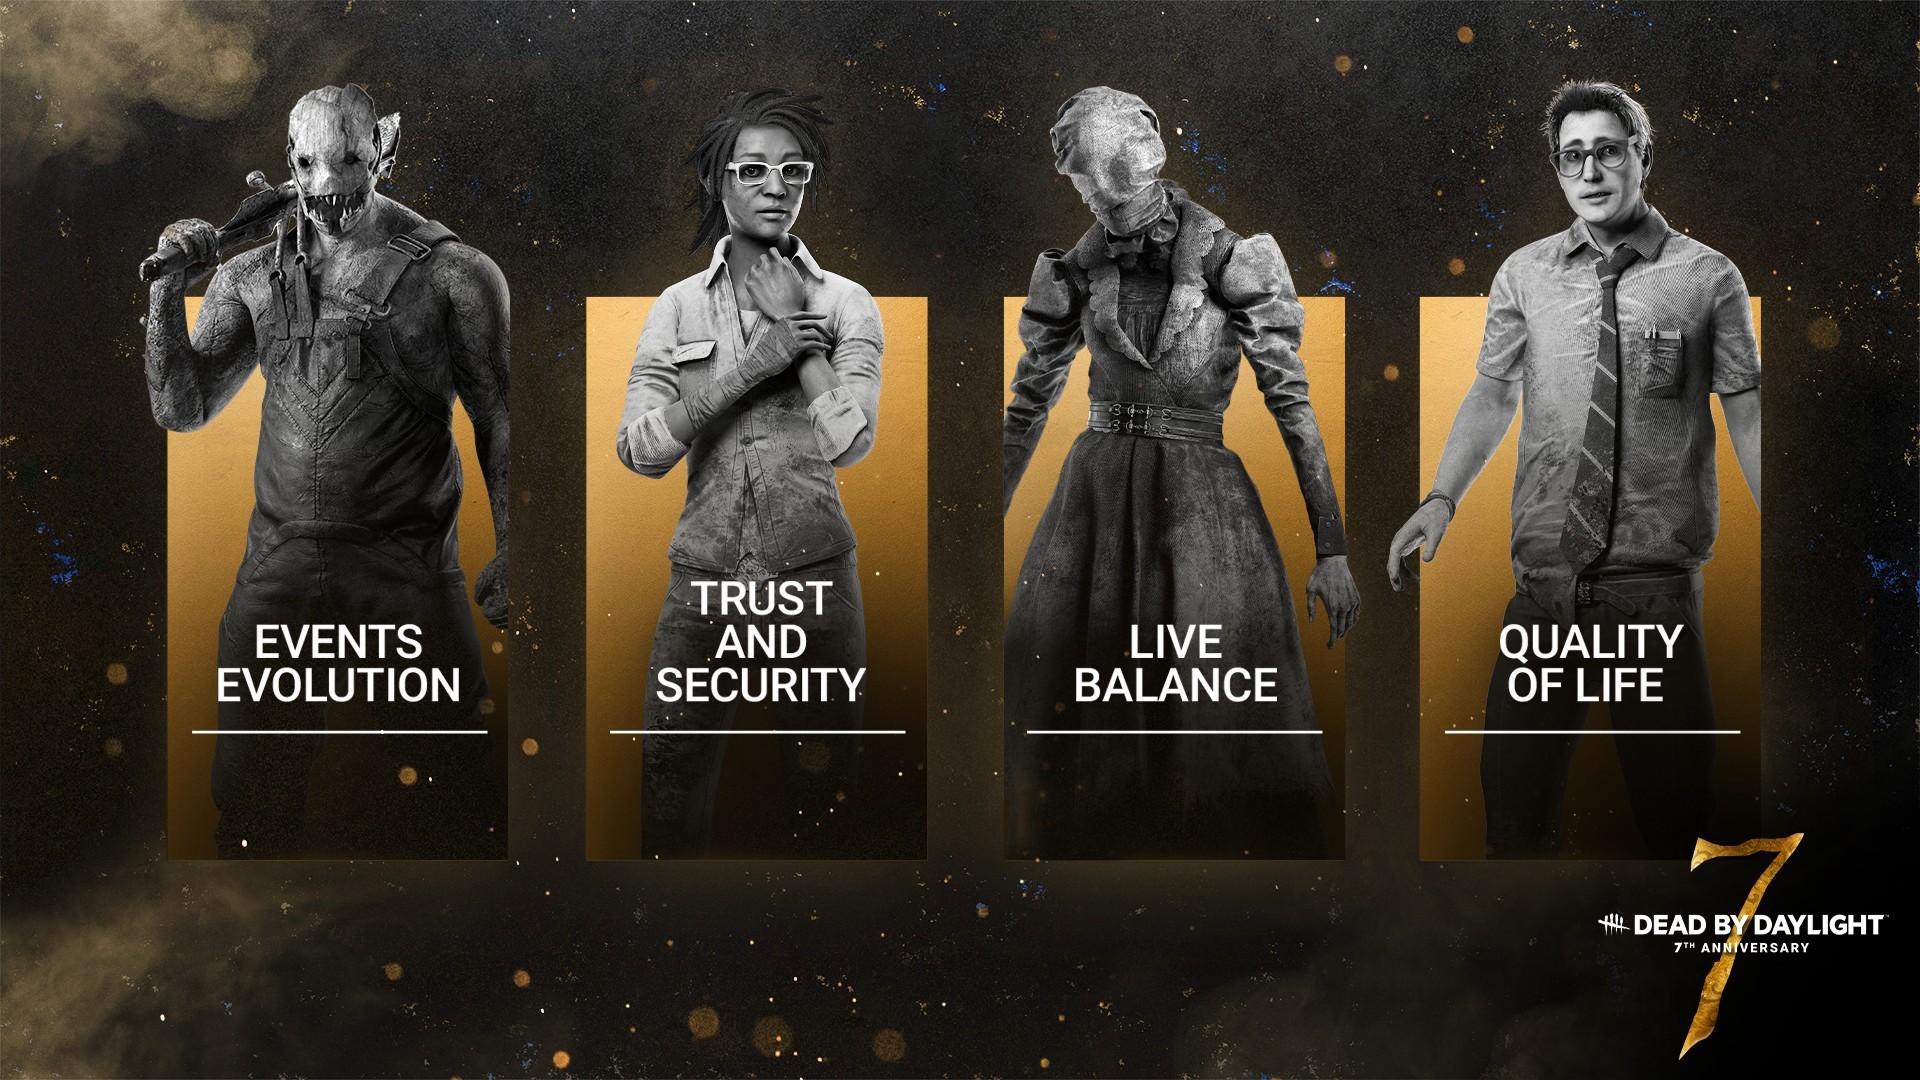 Dead by Daylight is finally solving its survivor disconnect problem